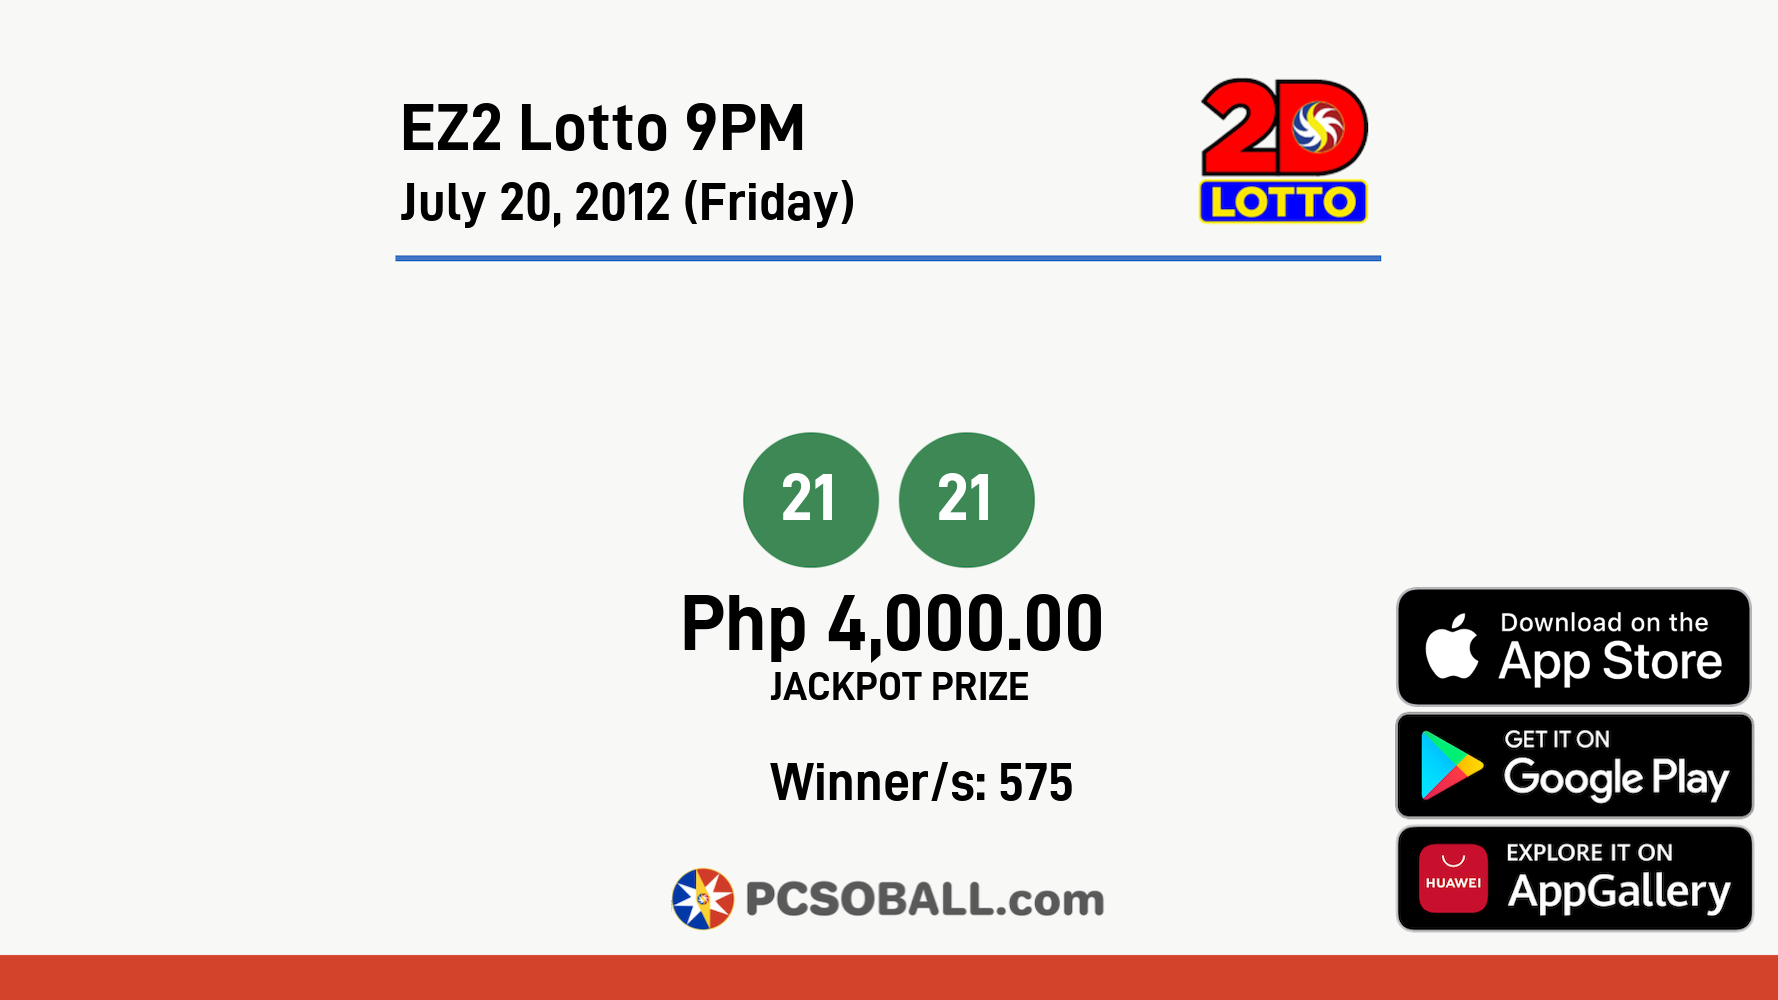 EZ2 Lotto 9PM July 20, 2012 (Friday) Result